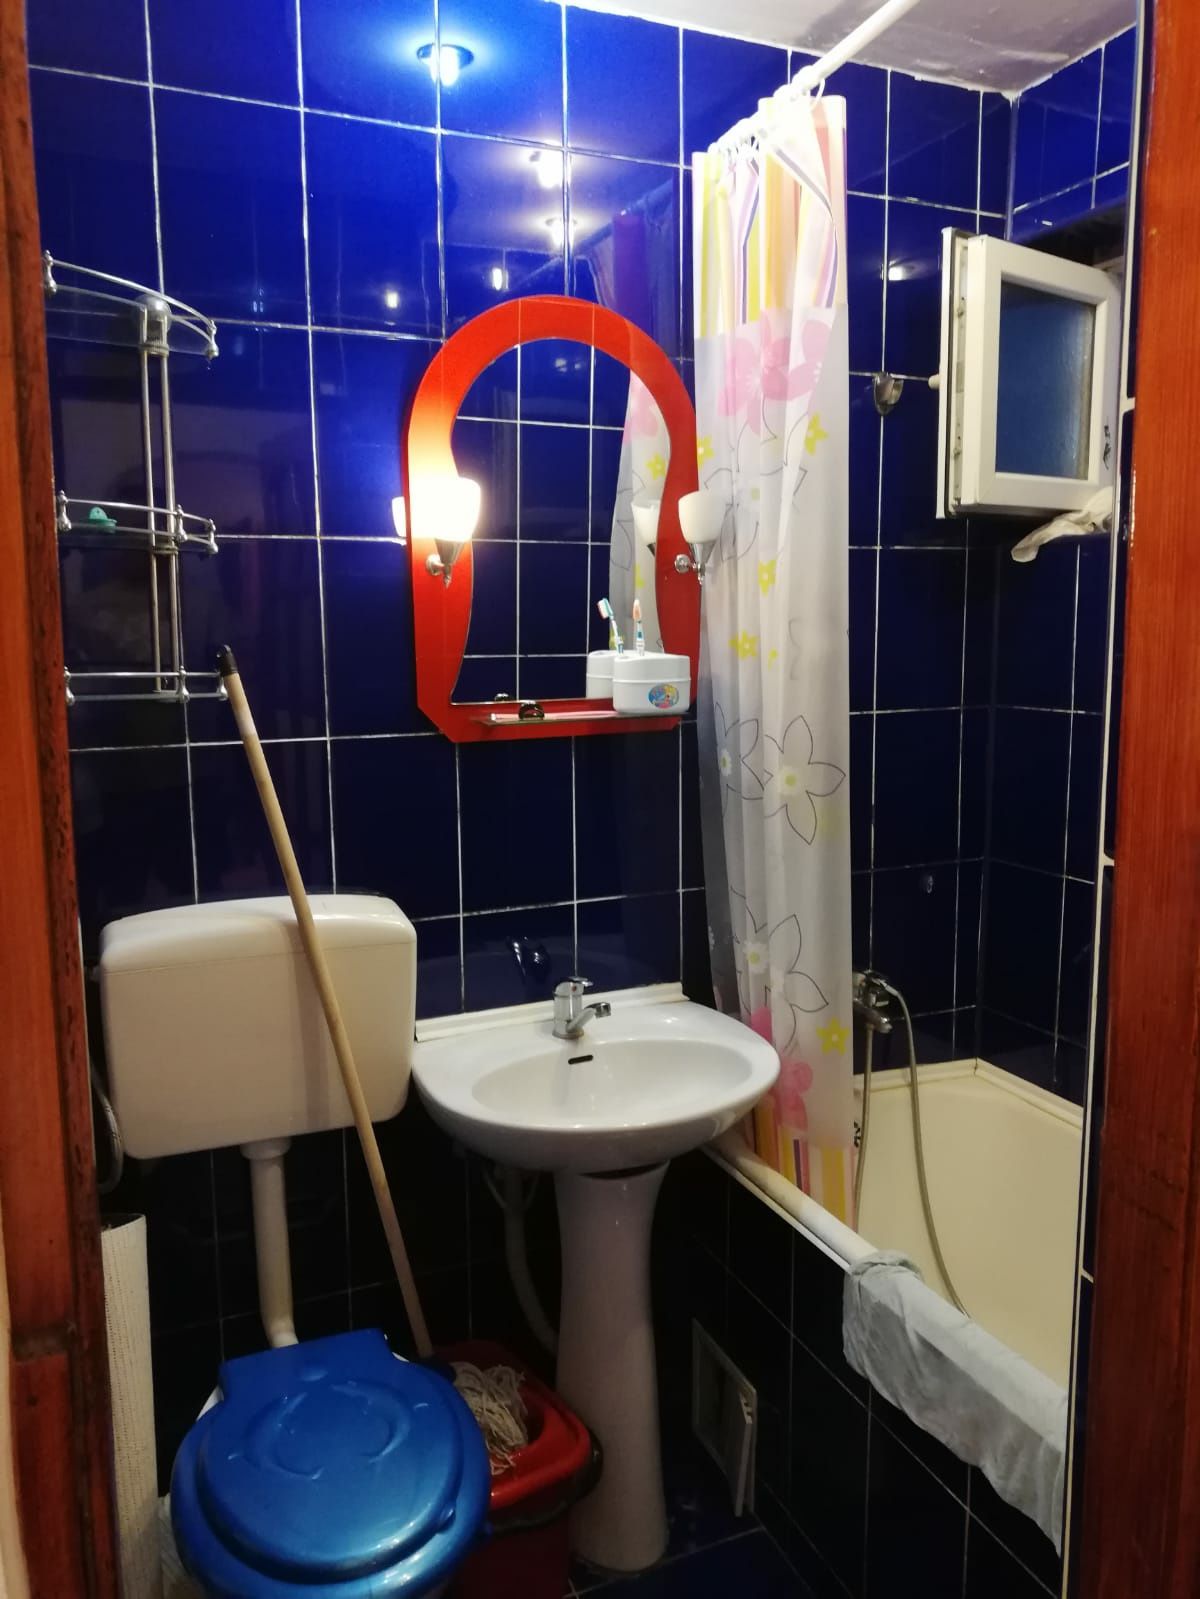 Apartment with 2 rooms, all conditions 4 personembers Ucraina